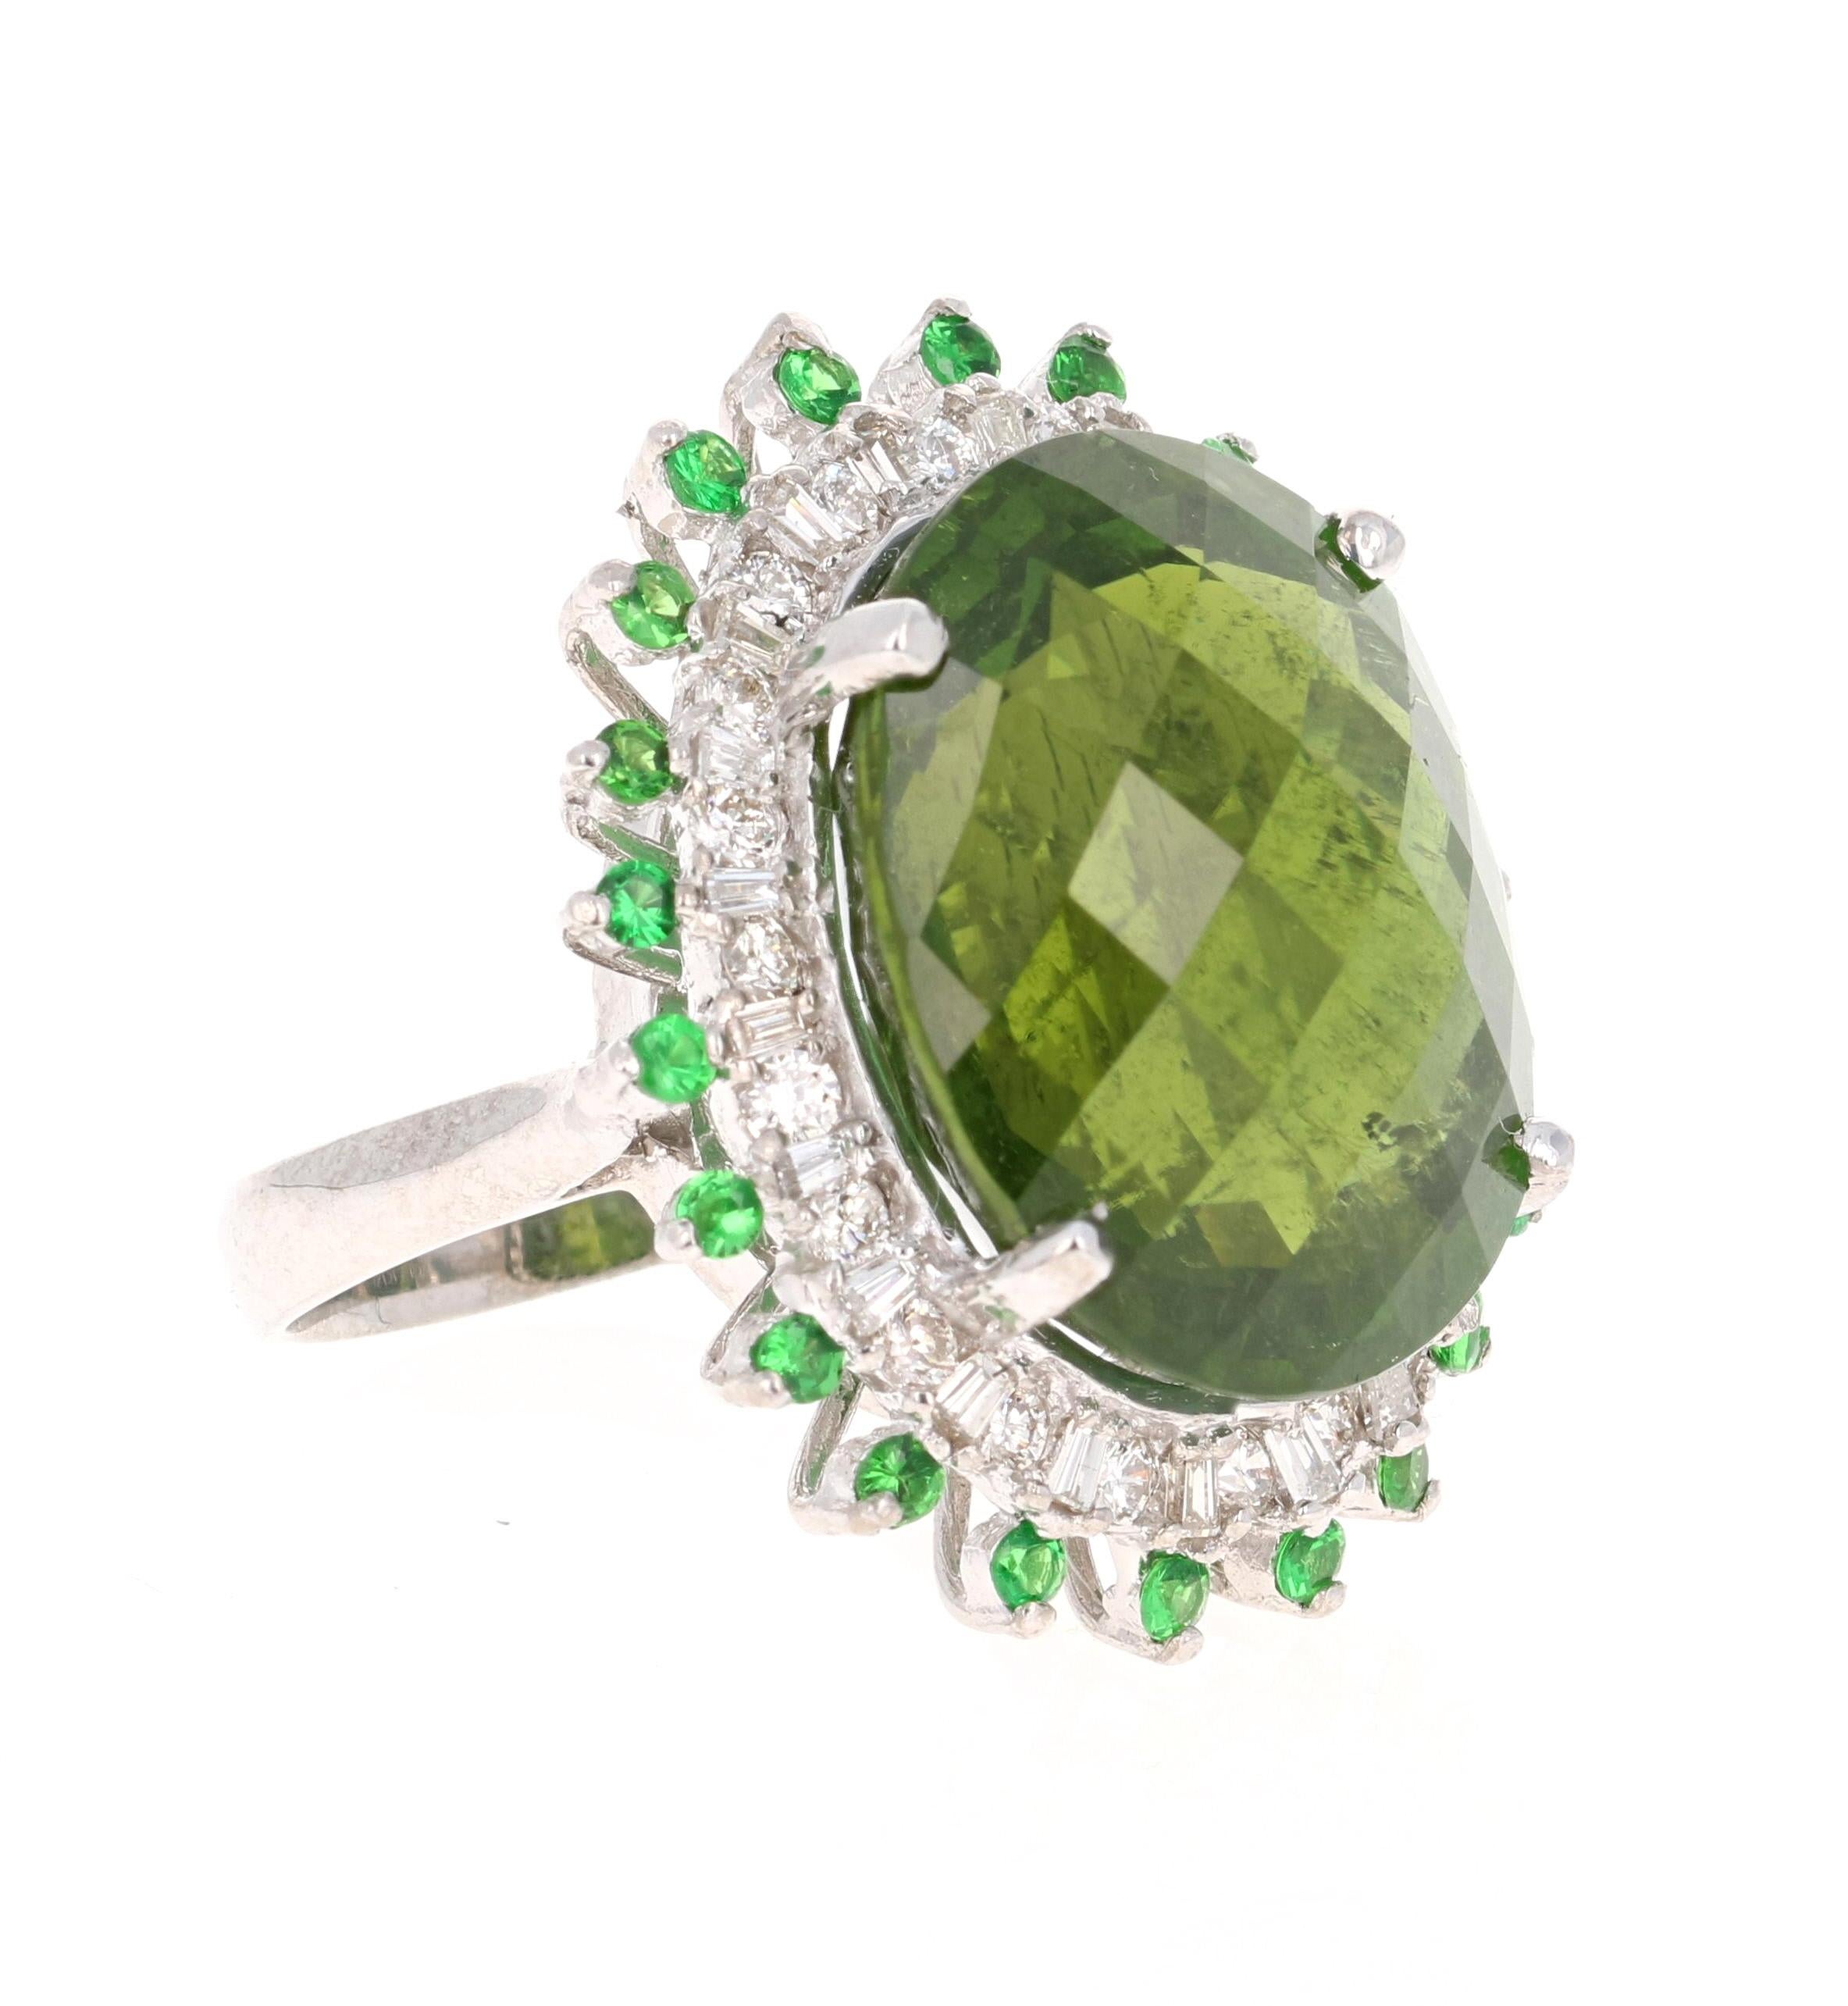 A beauty that is sure to be nothing less than a statement! 

This ring has a magnificently beautiful and large Oval Checkered Cut Green Tourmaline that weighs 26.25 Carats. The green tourmaline has hues of olive green and jungle green and has 44